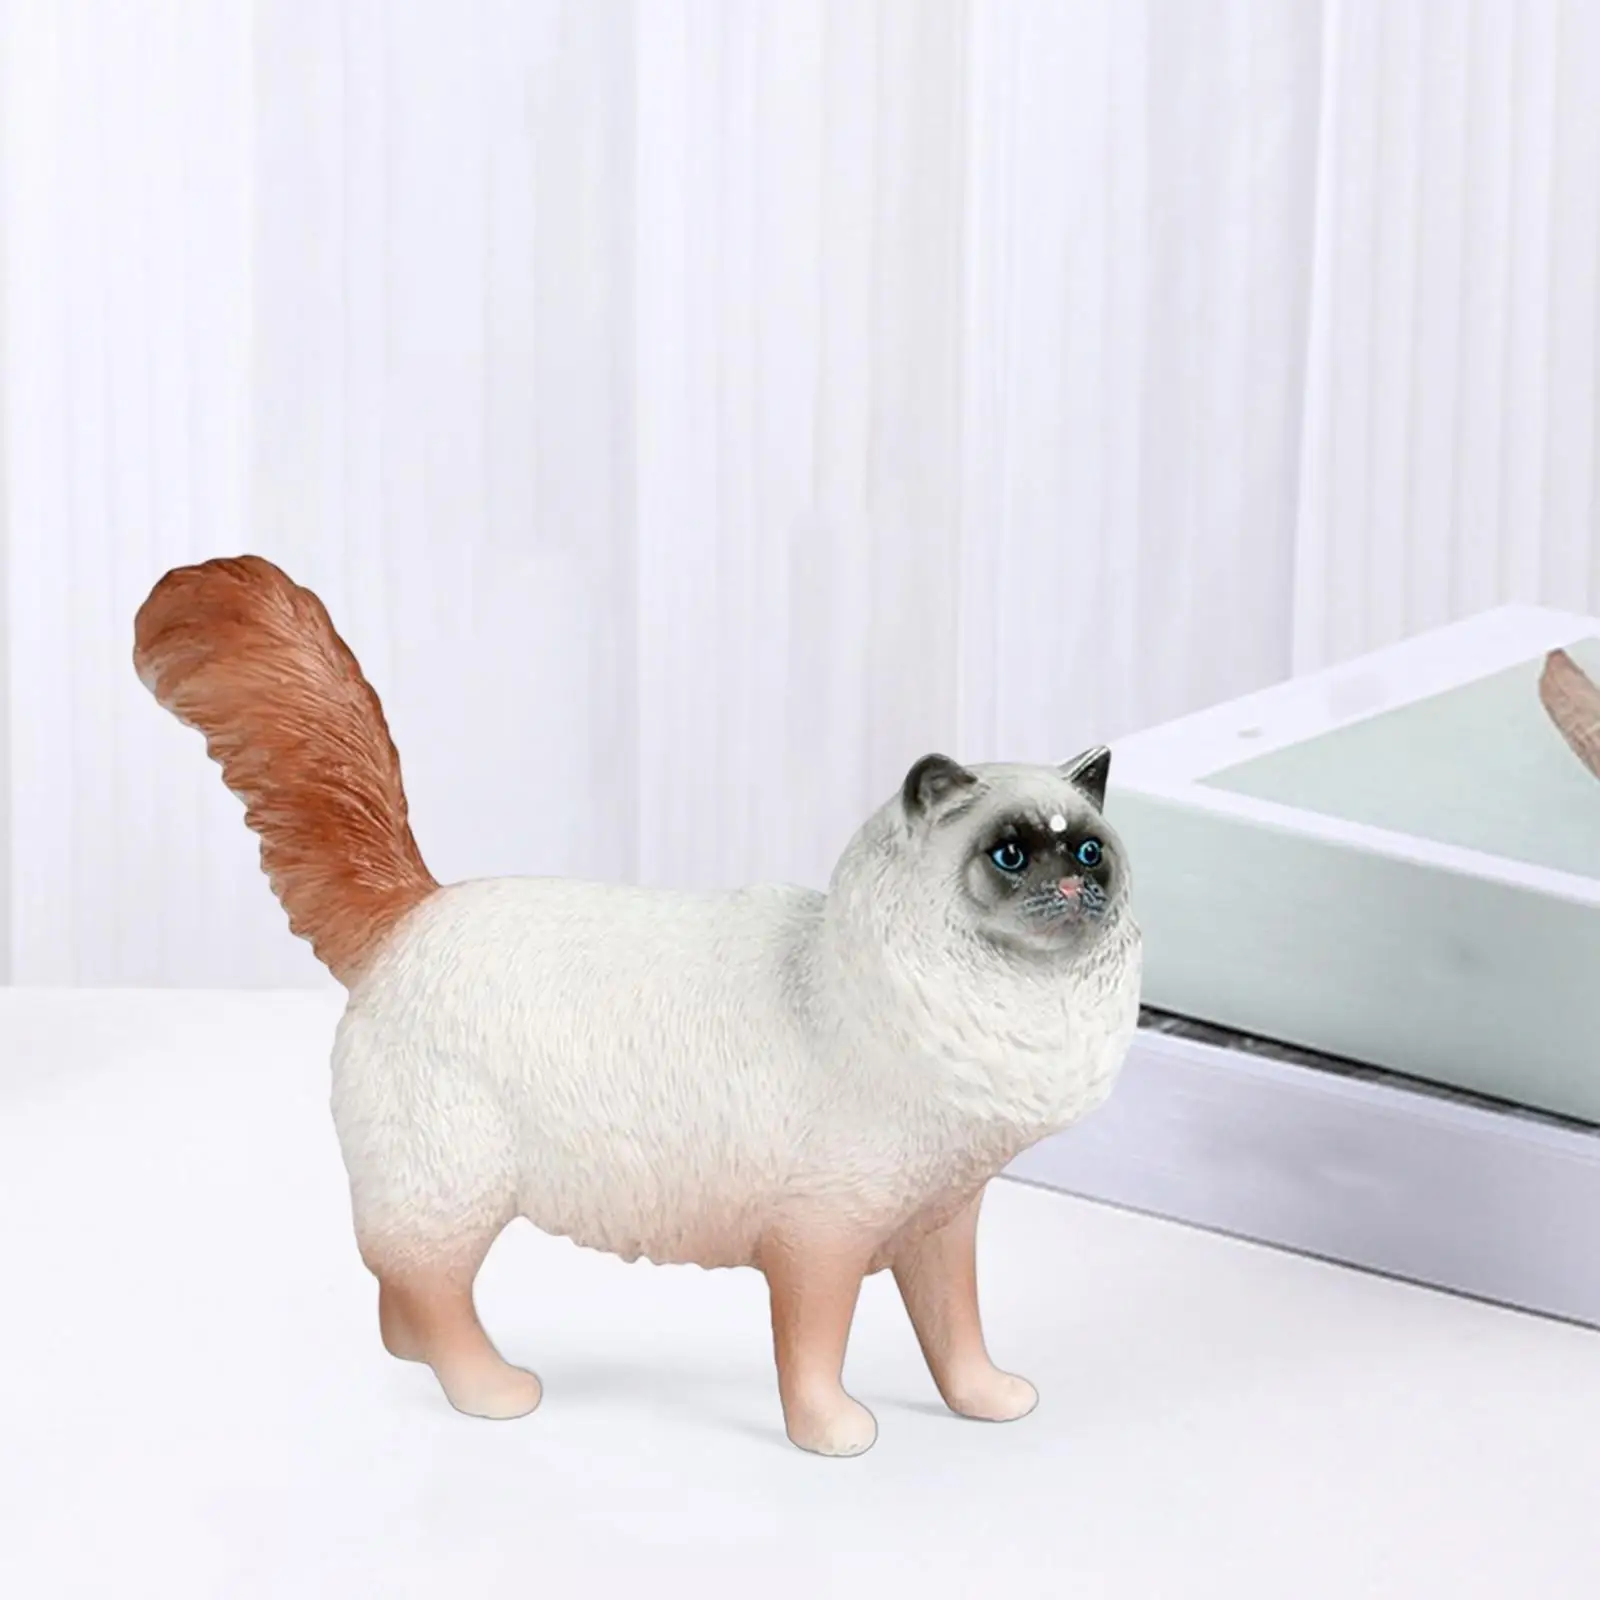 Simulation Cat Model Figurine Small Cat Figures Toy, Collection Playset Educational Toys for Decor Landscape Housewarming Gifts